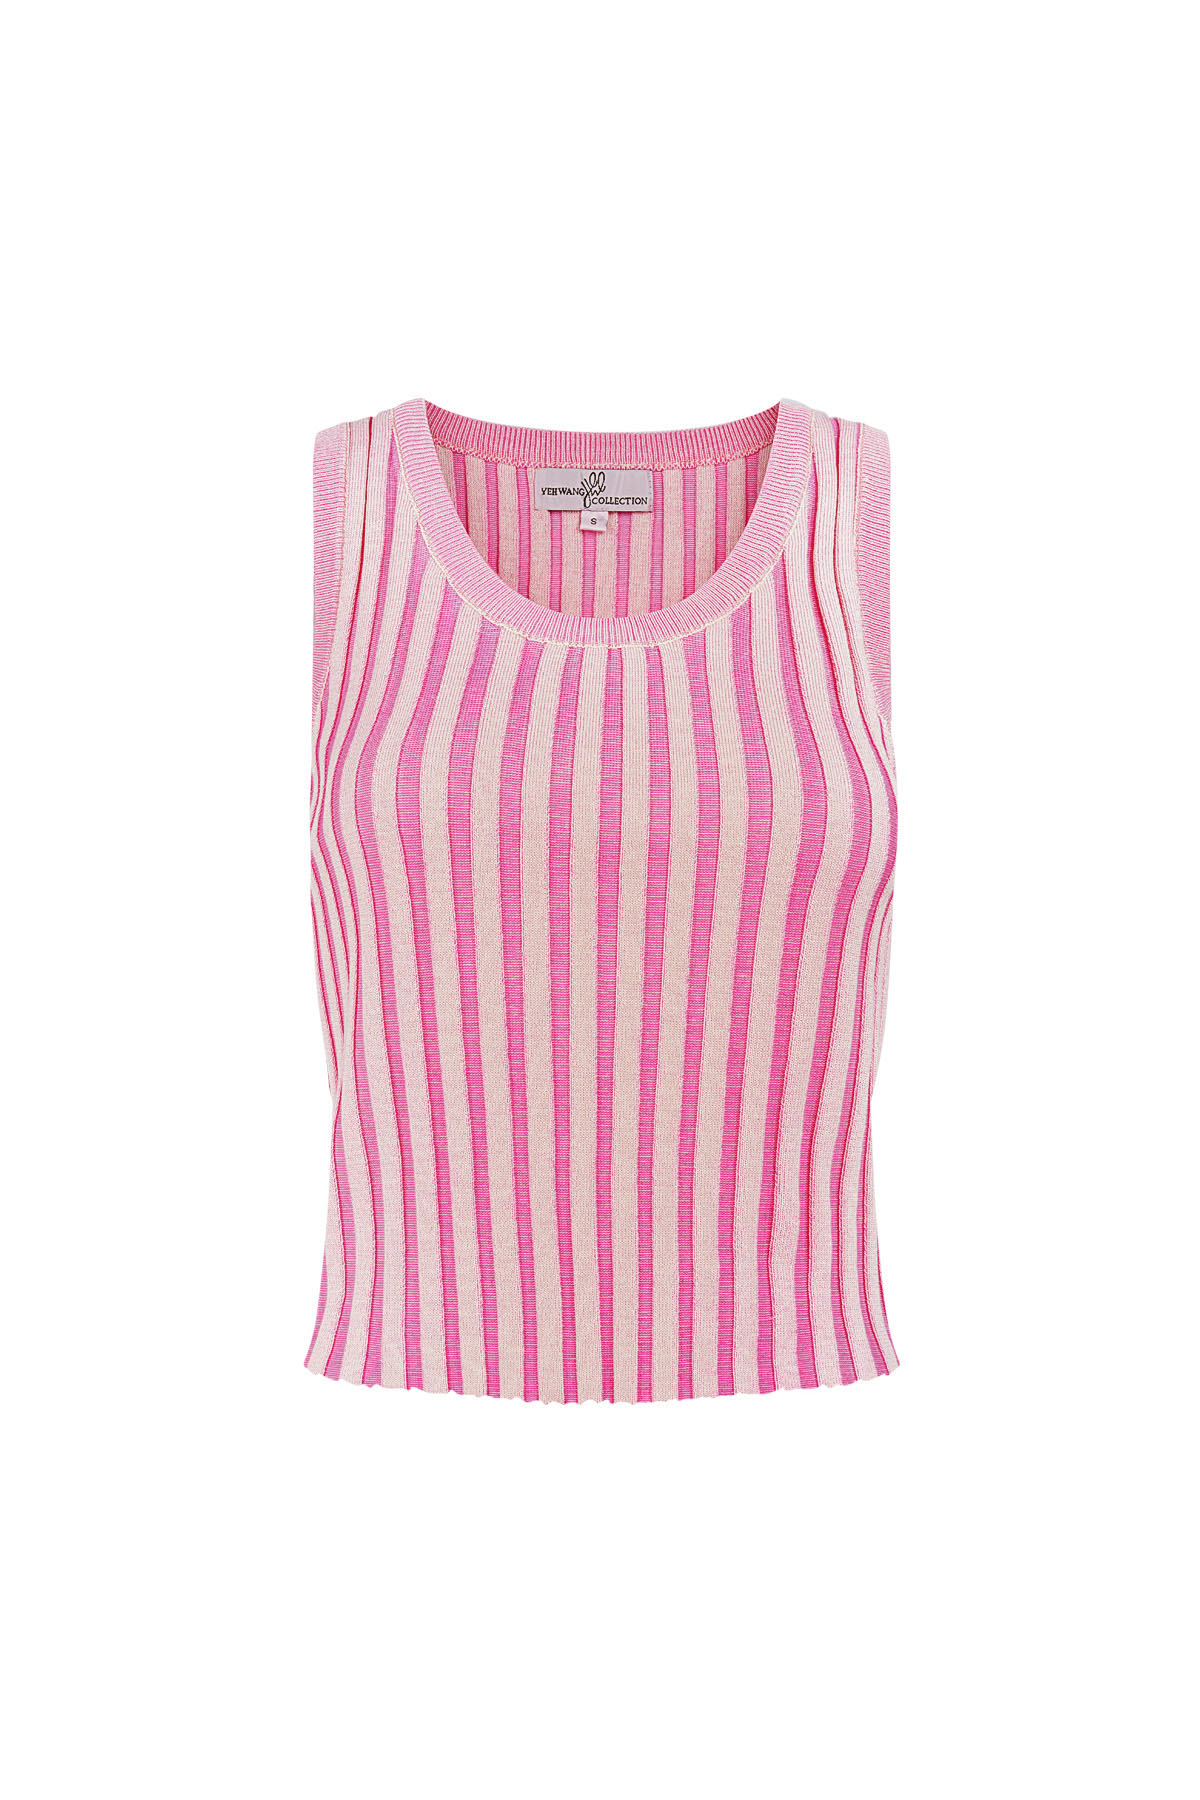 Sleeveless, striped top small – pink 